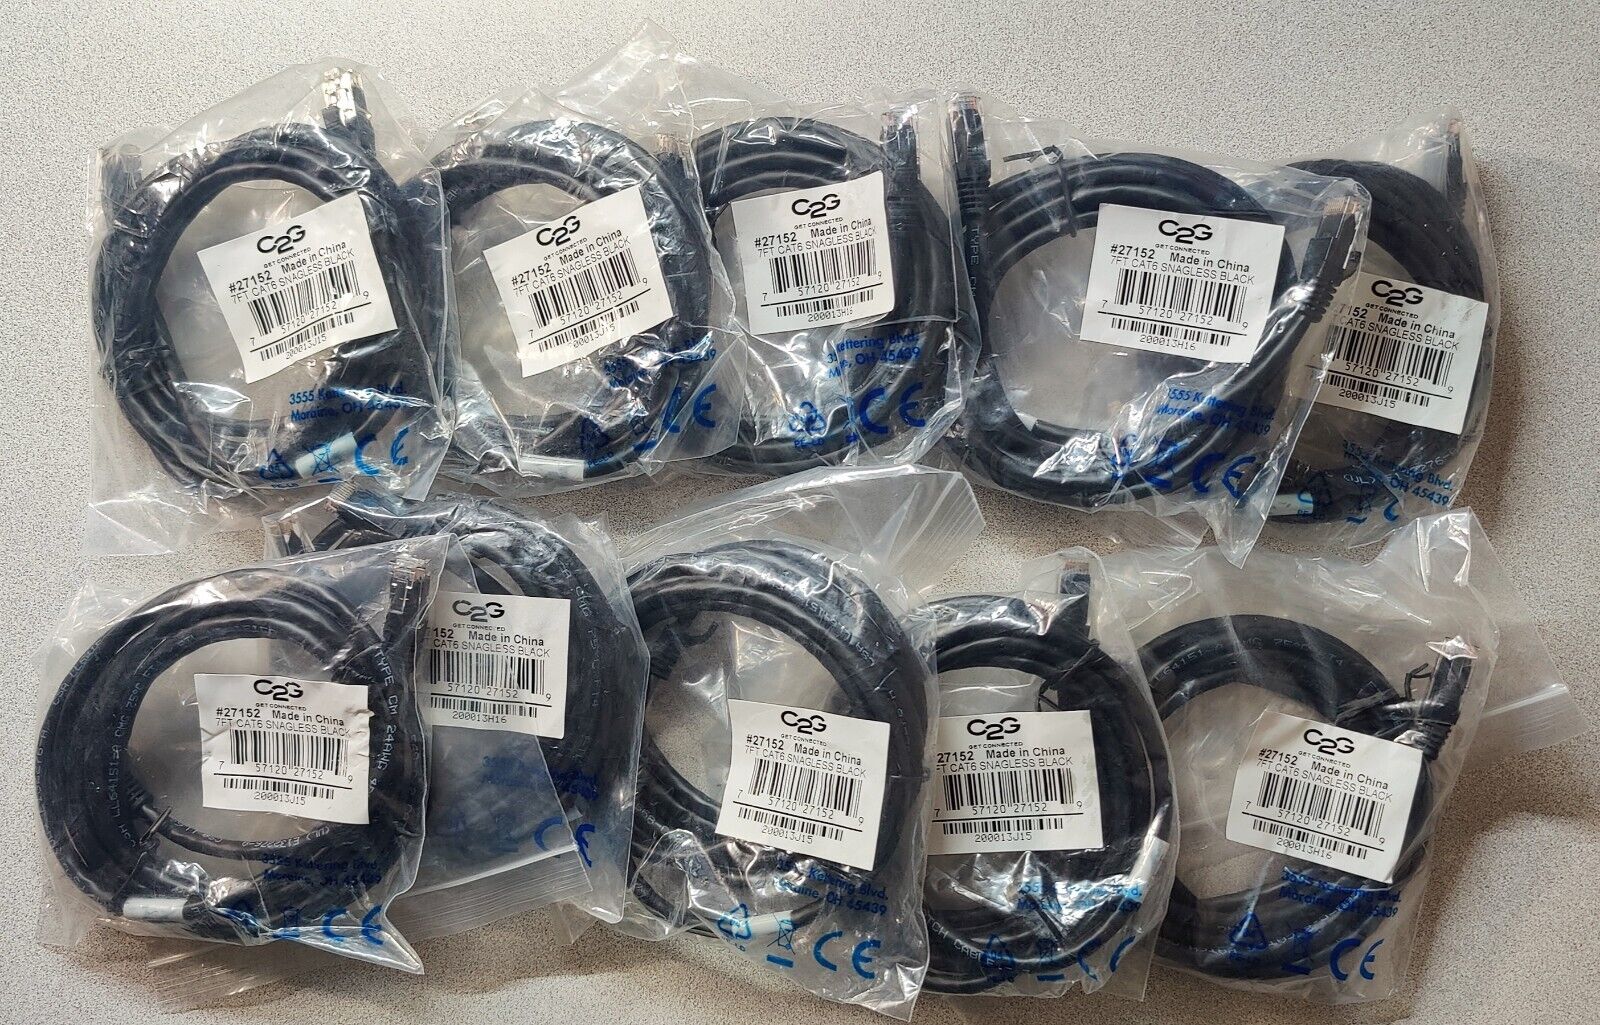 10 x Cables to Go 7' Cat6 RJ45 Network Cable, Snagless, Booted, Blck, C2G #27152